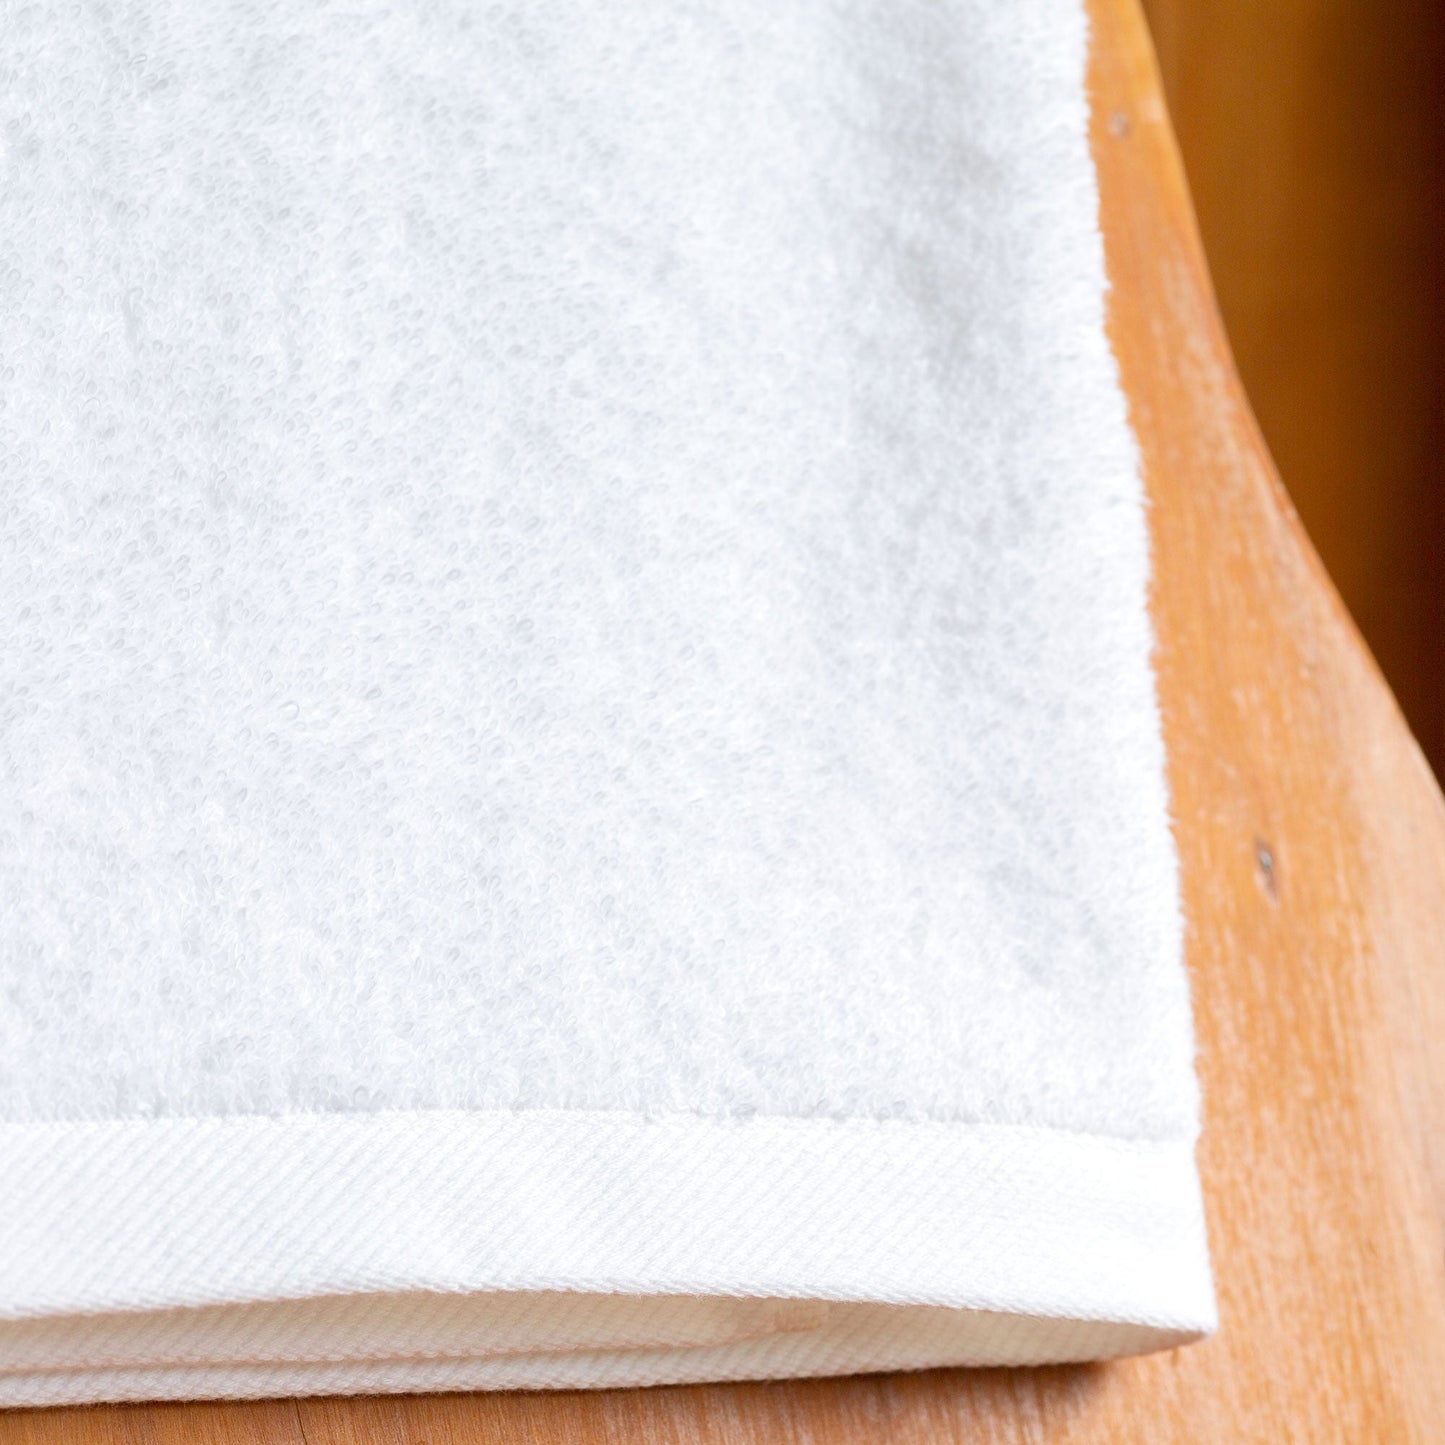 New! The Hotel Hand Towel (Pairs)